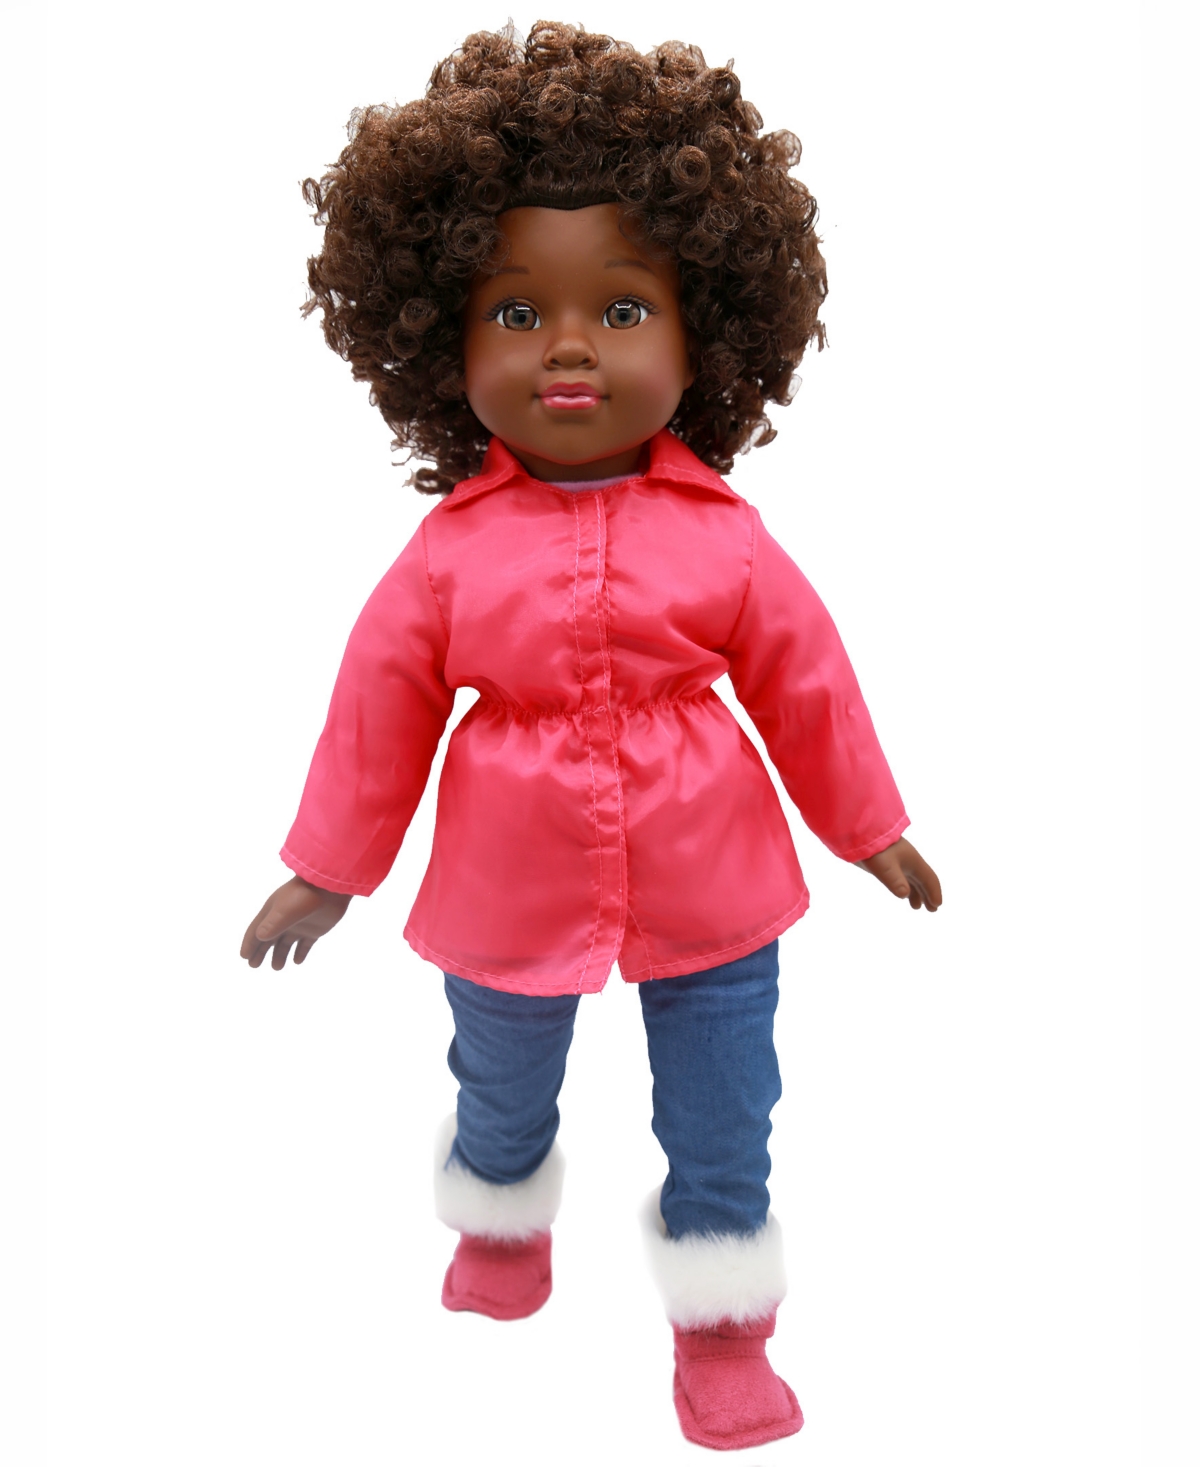 Positively Perfect Dolls Kids' Positively Perfect 18" Doll In Pink